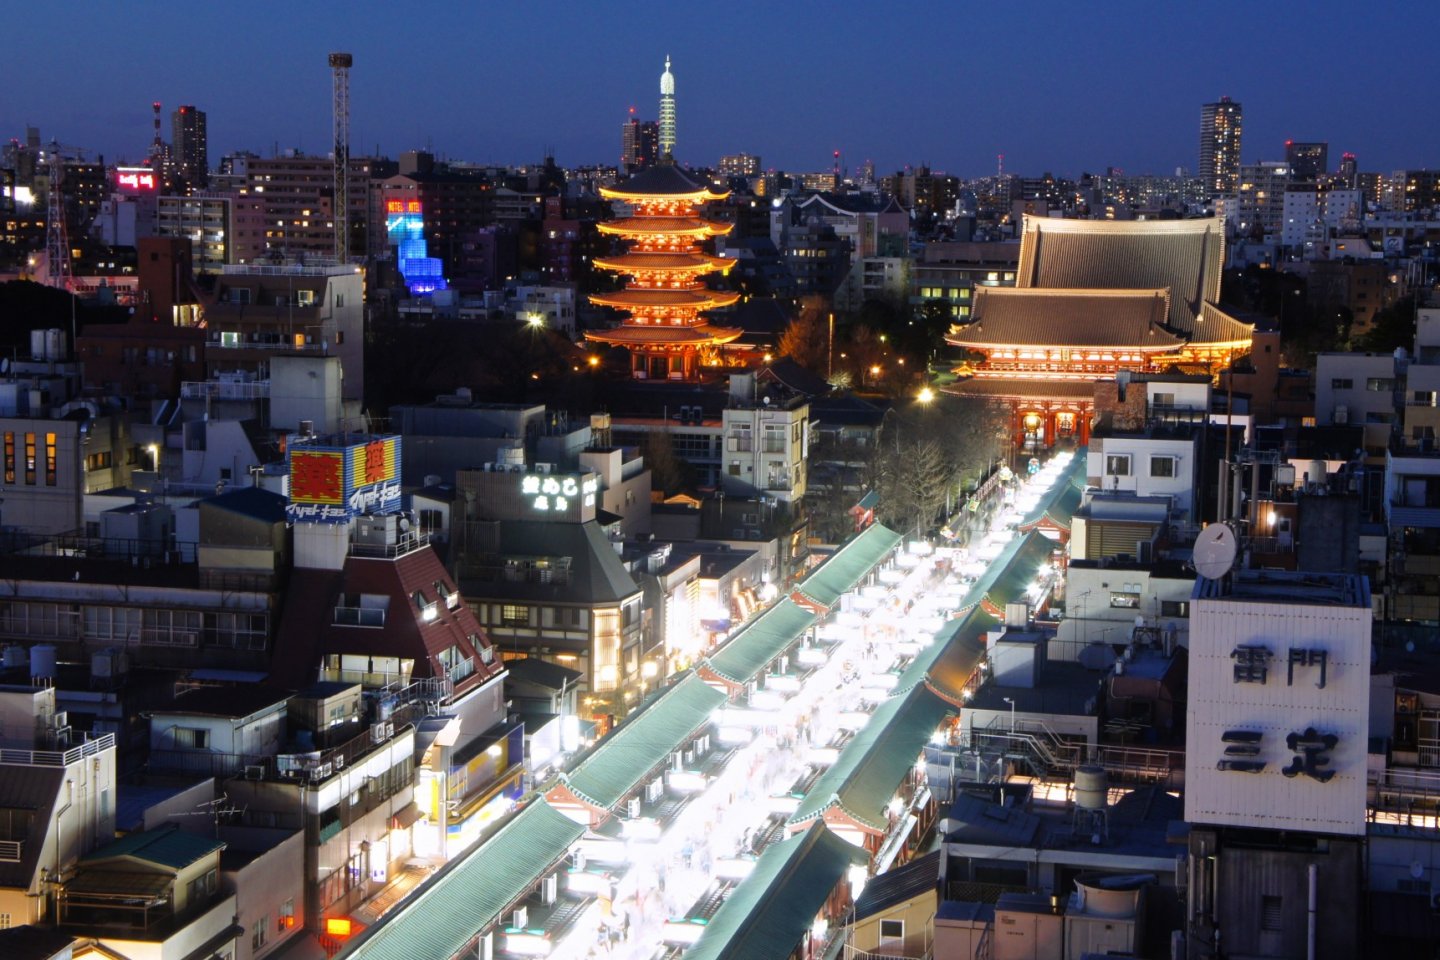 The twilight time view of the Asakusa area and the well lit Nakamise Dori, the shopping street leading to the temple.